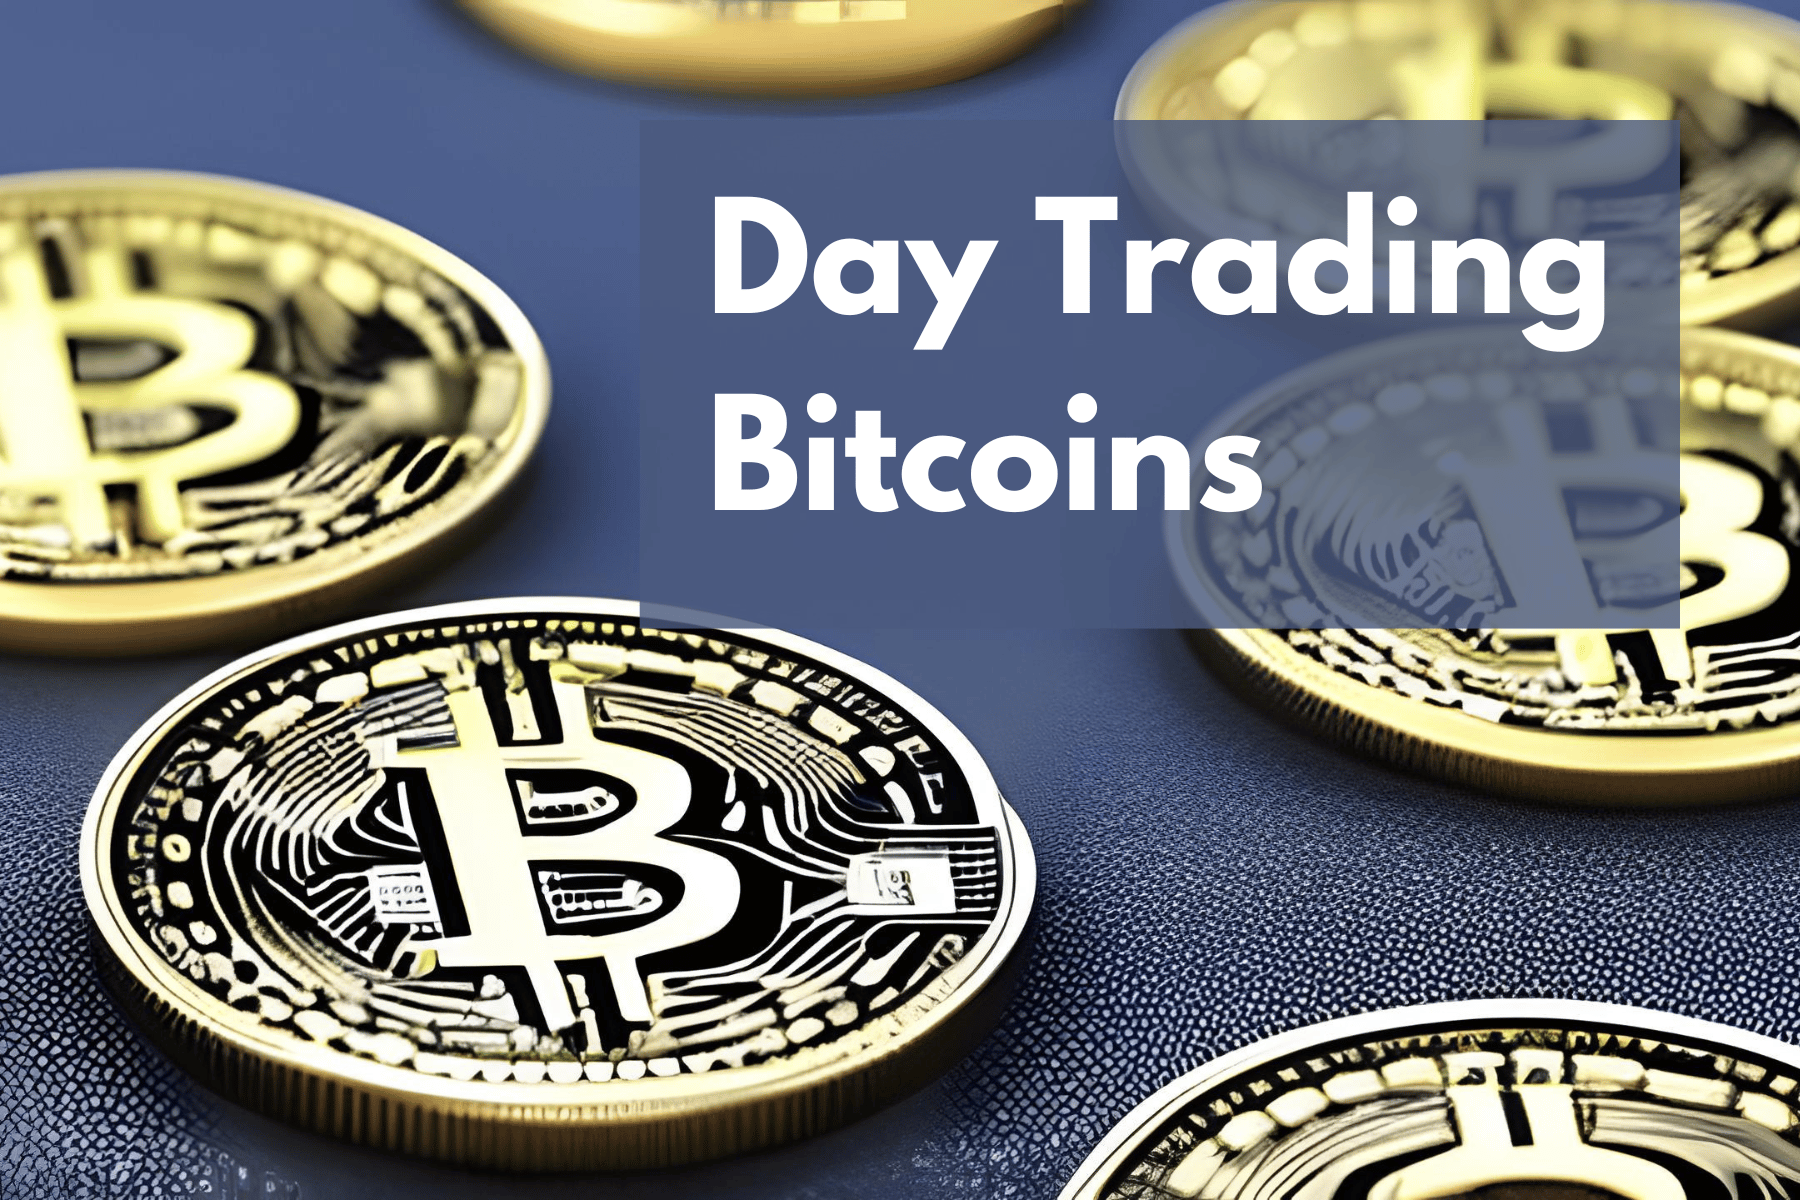 Day Trading Bitcoins: Seizing Opportunities in Cryptocurrency Markets